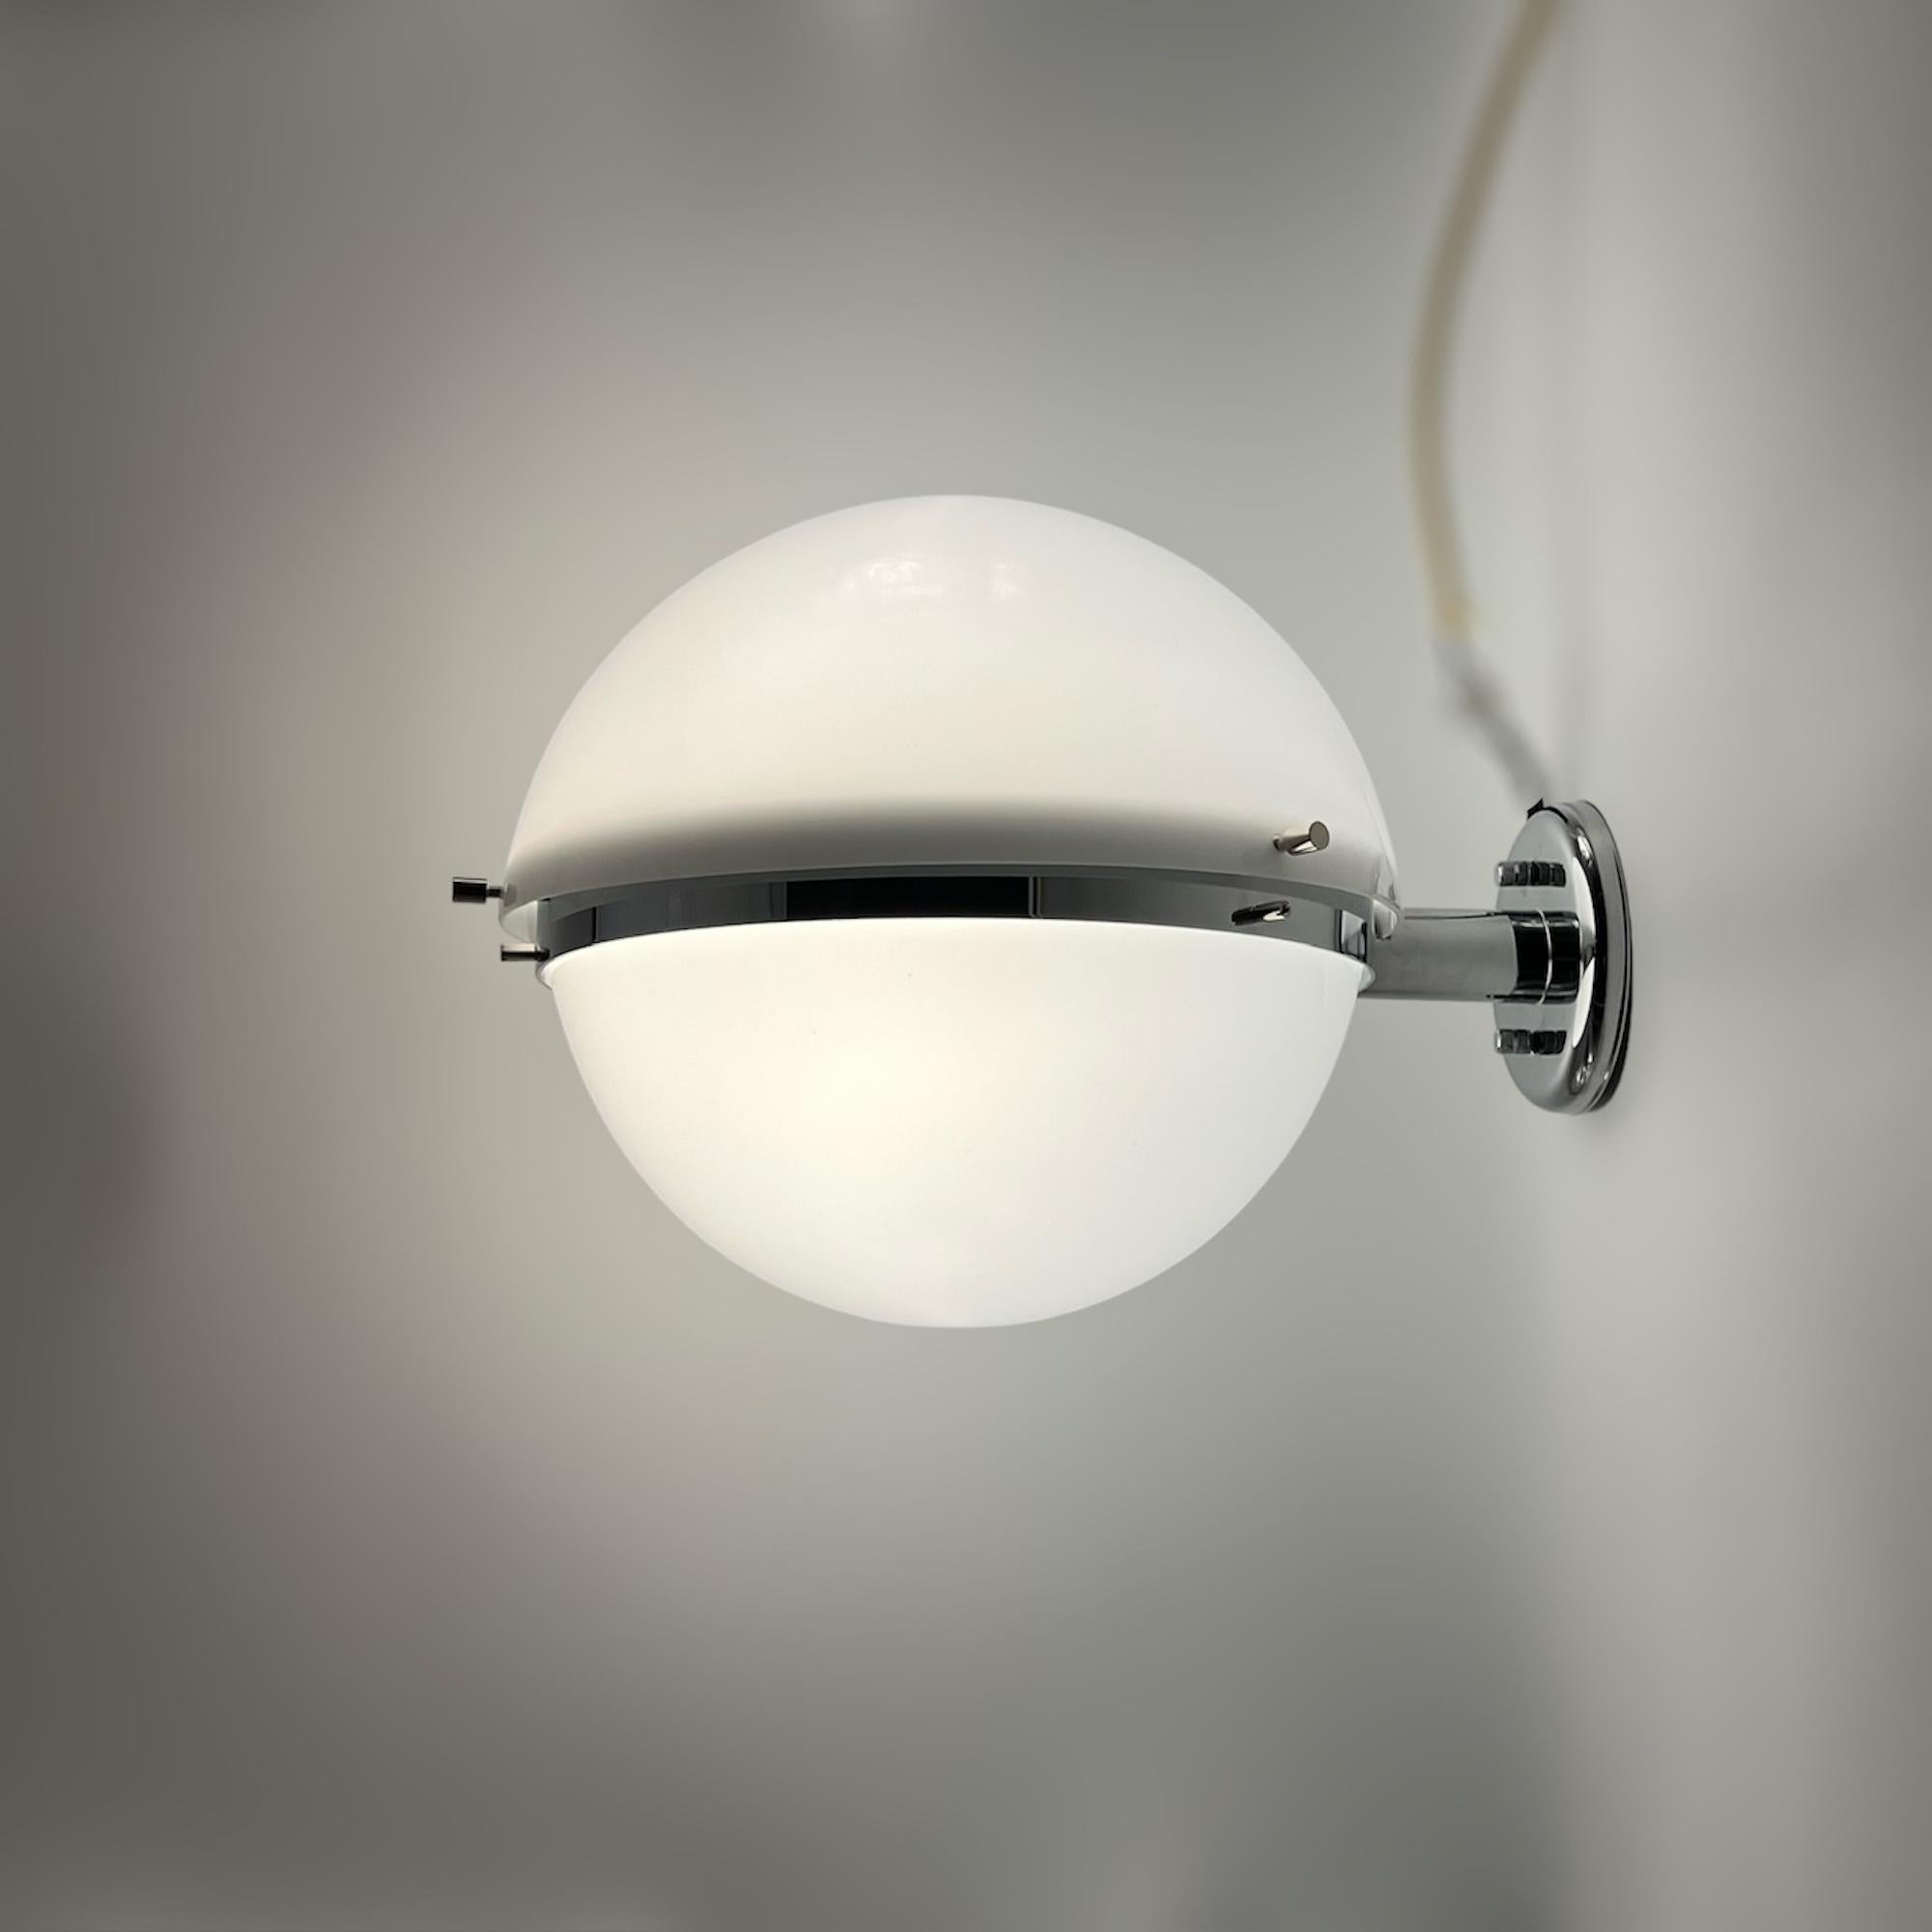 Amazing space age wall lamp designed and manufactured by Harveiluce in the 70s.

The model 5005 is a brilliant example of Harveiluce / iGuzzini design and innovative manufacturing tecniques. Two translucent half-globes interconnected with a shining